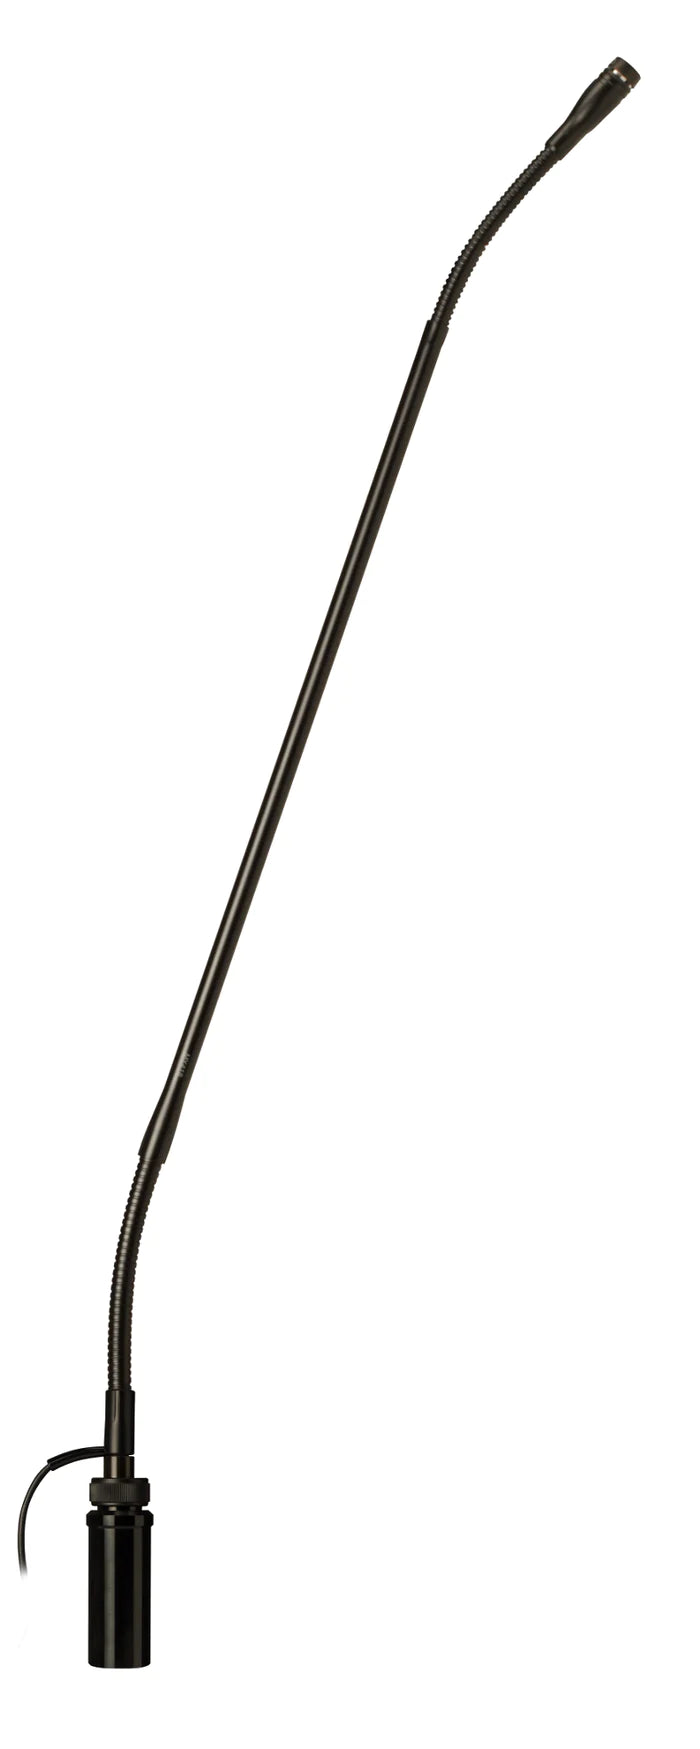 Shure MX418SE/C Microphone Gooseneck - Shure MX418SE/C - 18" Cardioid Gooseneck Microphone with Flange Mount and 10 foot Side Exit Cable